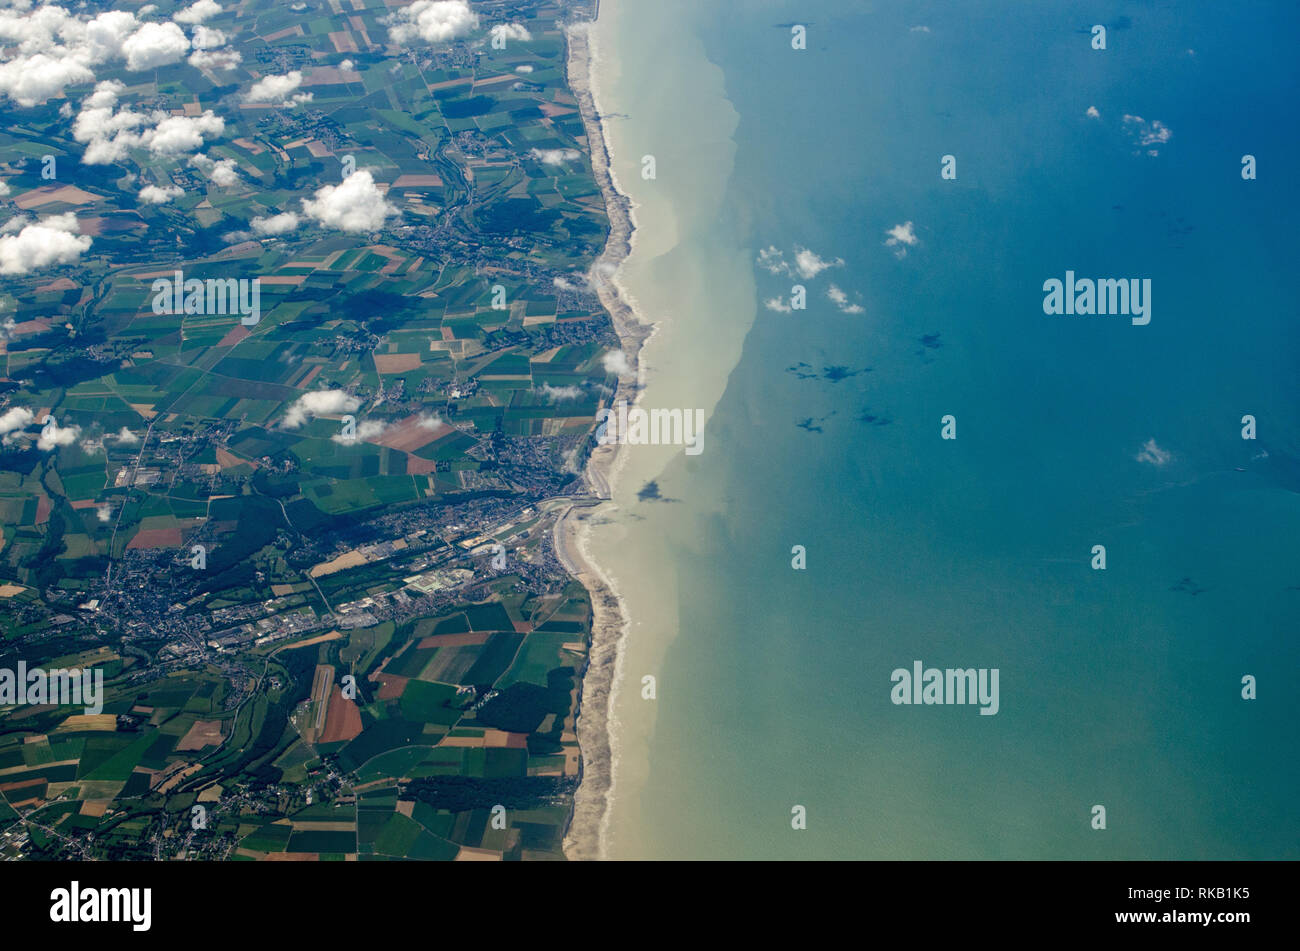 Aerial view of the Normandy coastline with the town of Le Treport in Seine Maritime towards the middle of the picture. Stock Photo